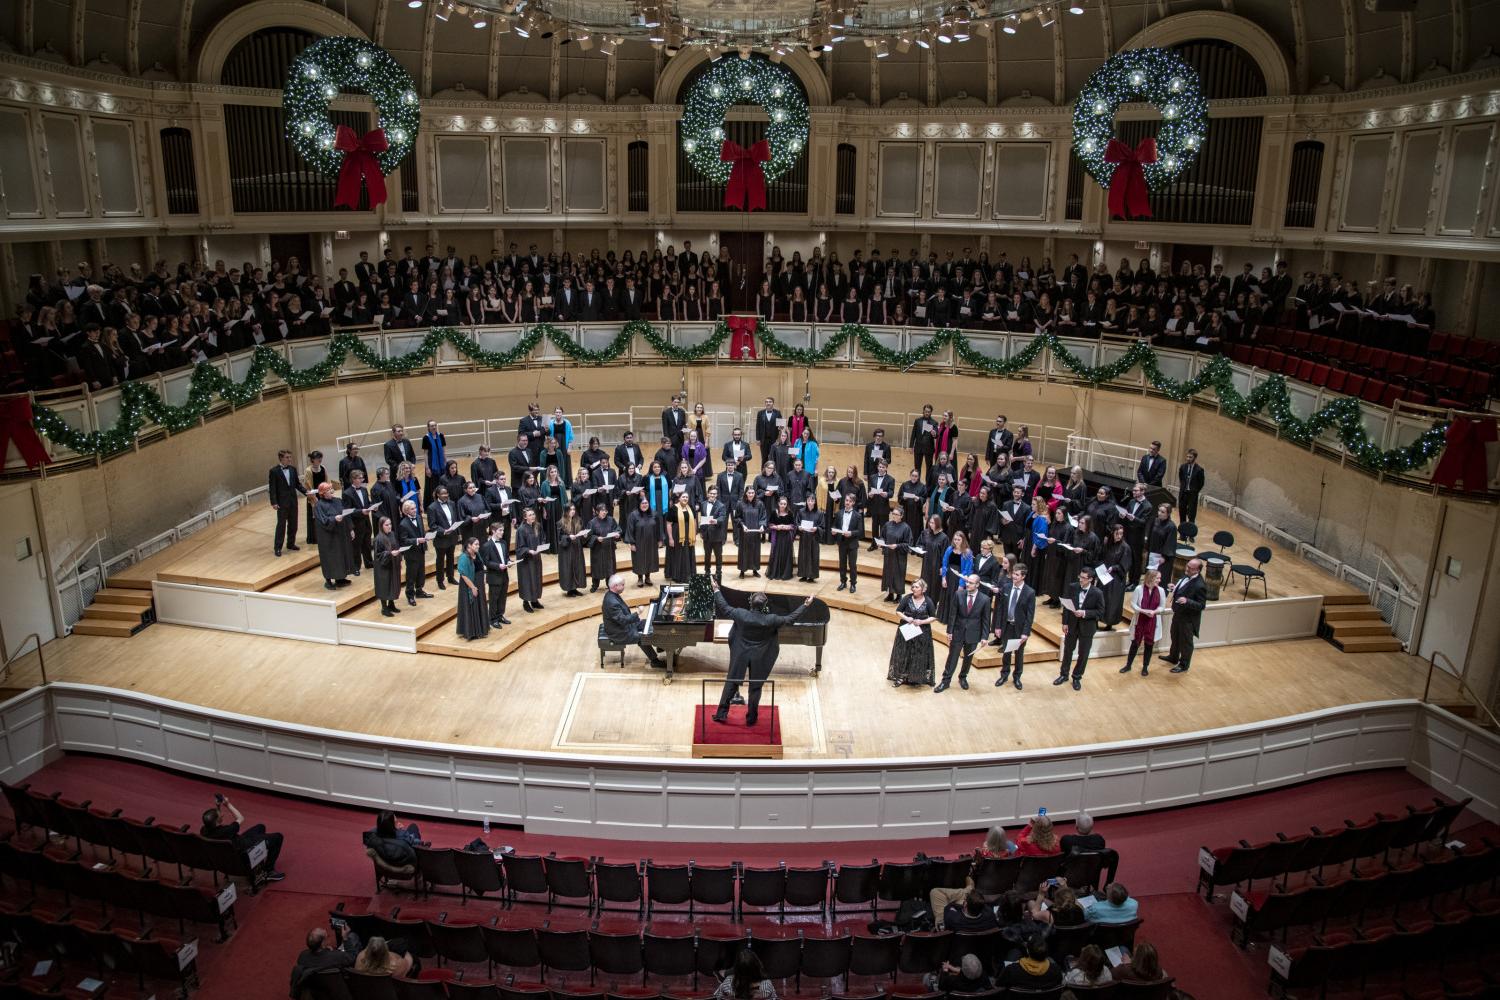 The <a href='http://ydk2.healthydairyland.com'>全球十大赌钱排行app</a> Choir performs in the Chicago Symphony Hall.